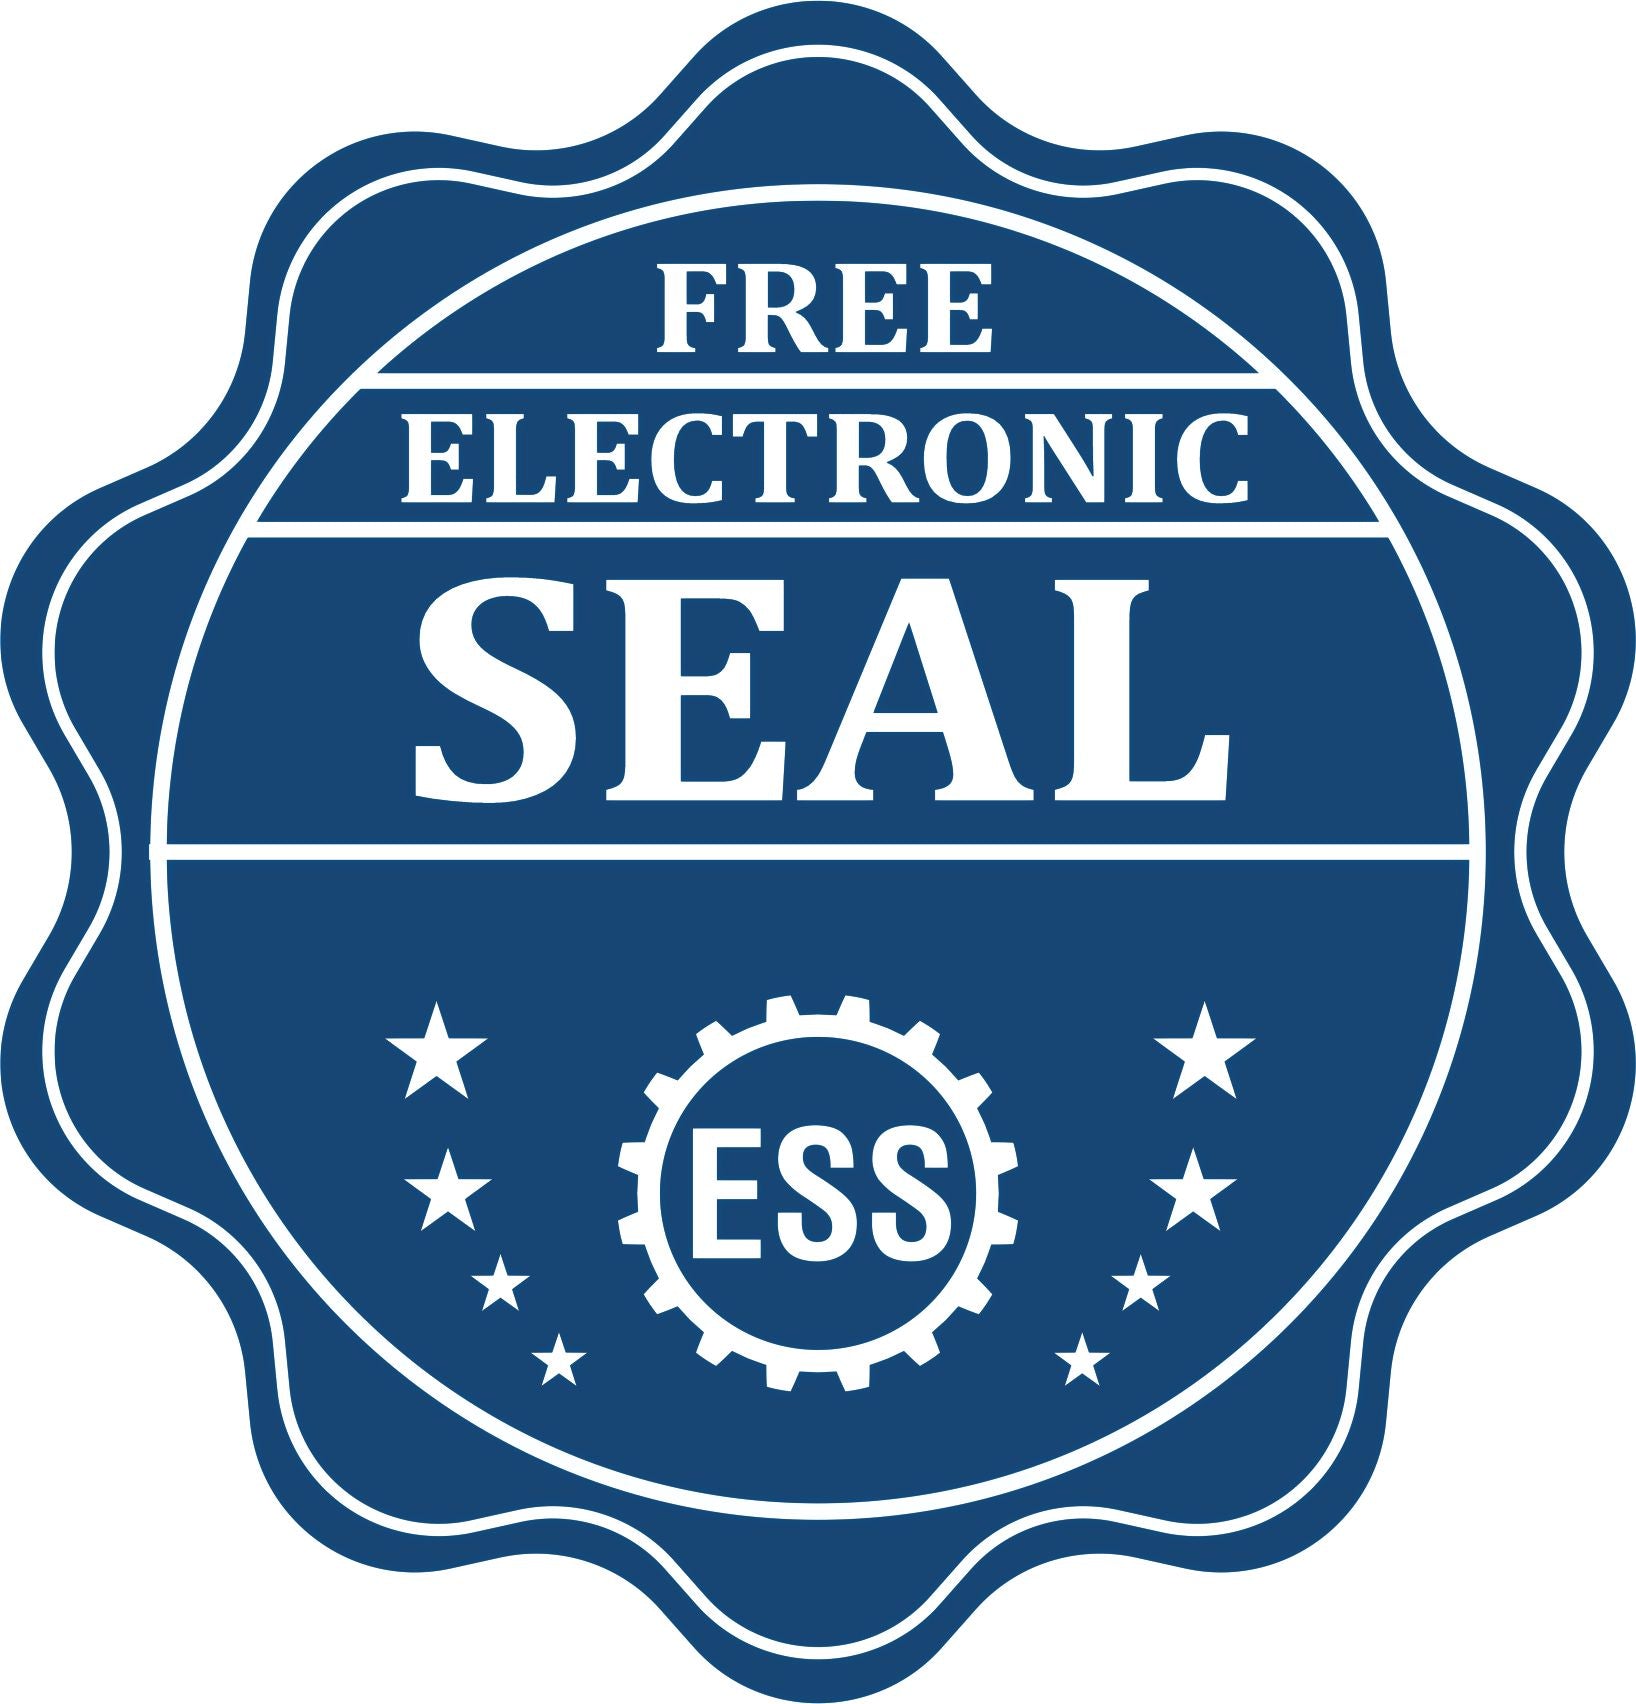 A badge showing a free electronic seal for the Handheld Georgia Land Surveyor Seal with stars and the ESS gear on the emblem.